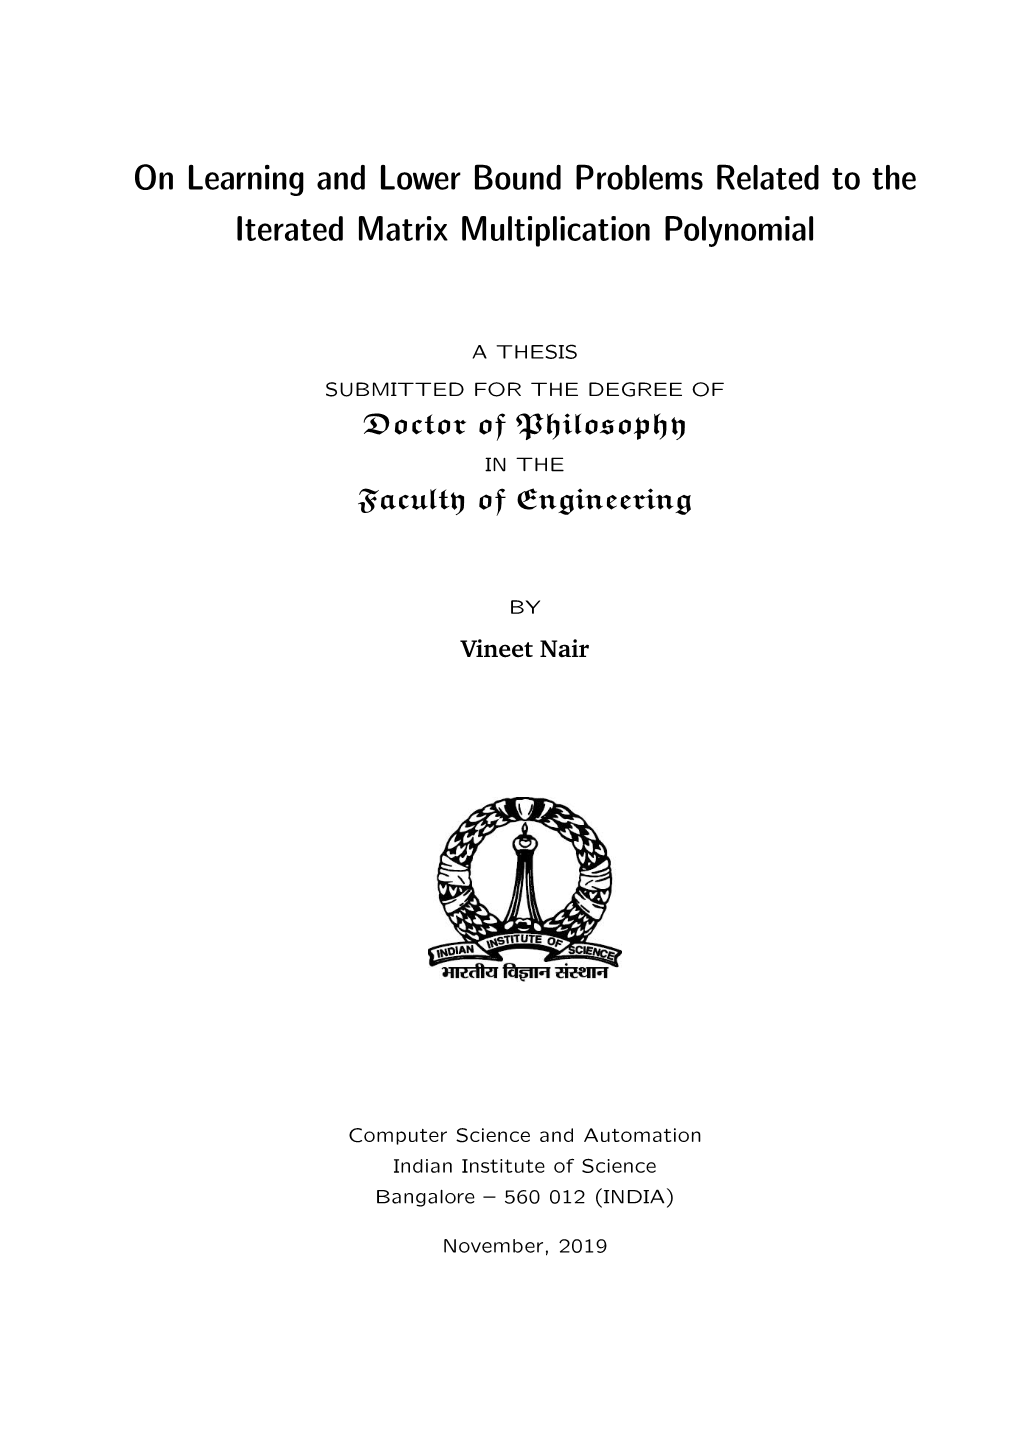 On Learning and Lower Bound Problems Related to the Iterated Matrix Multiplication Polynomial